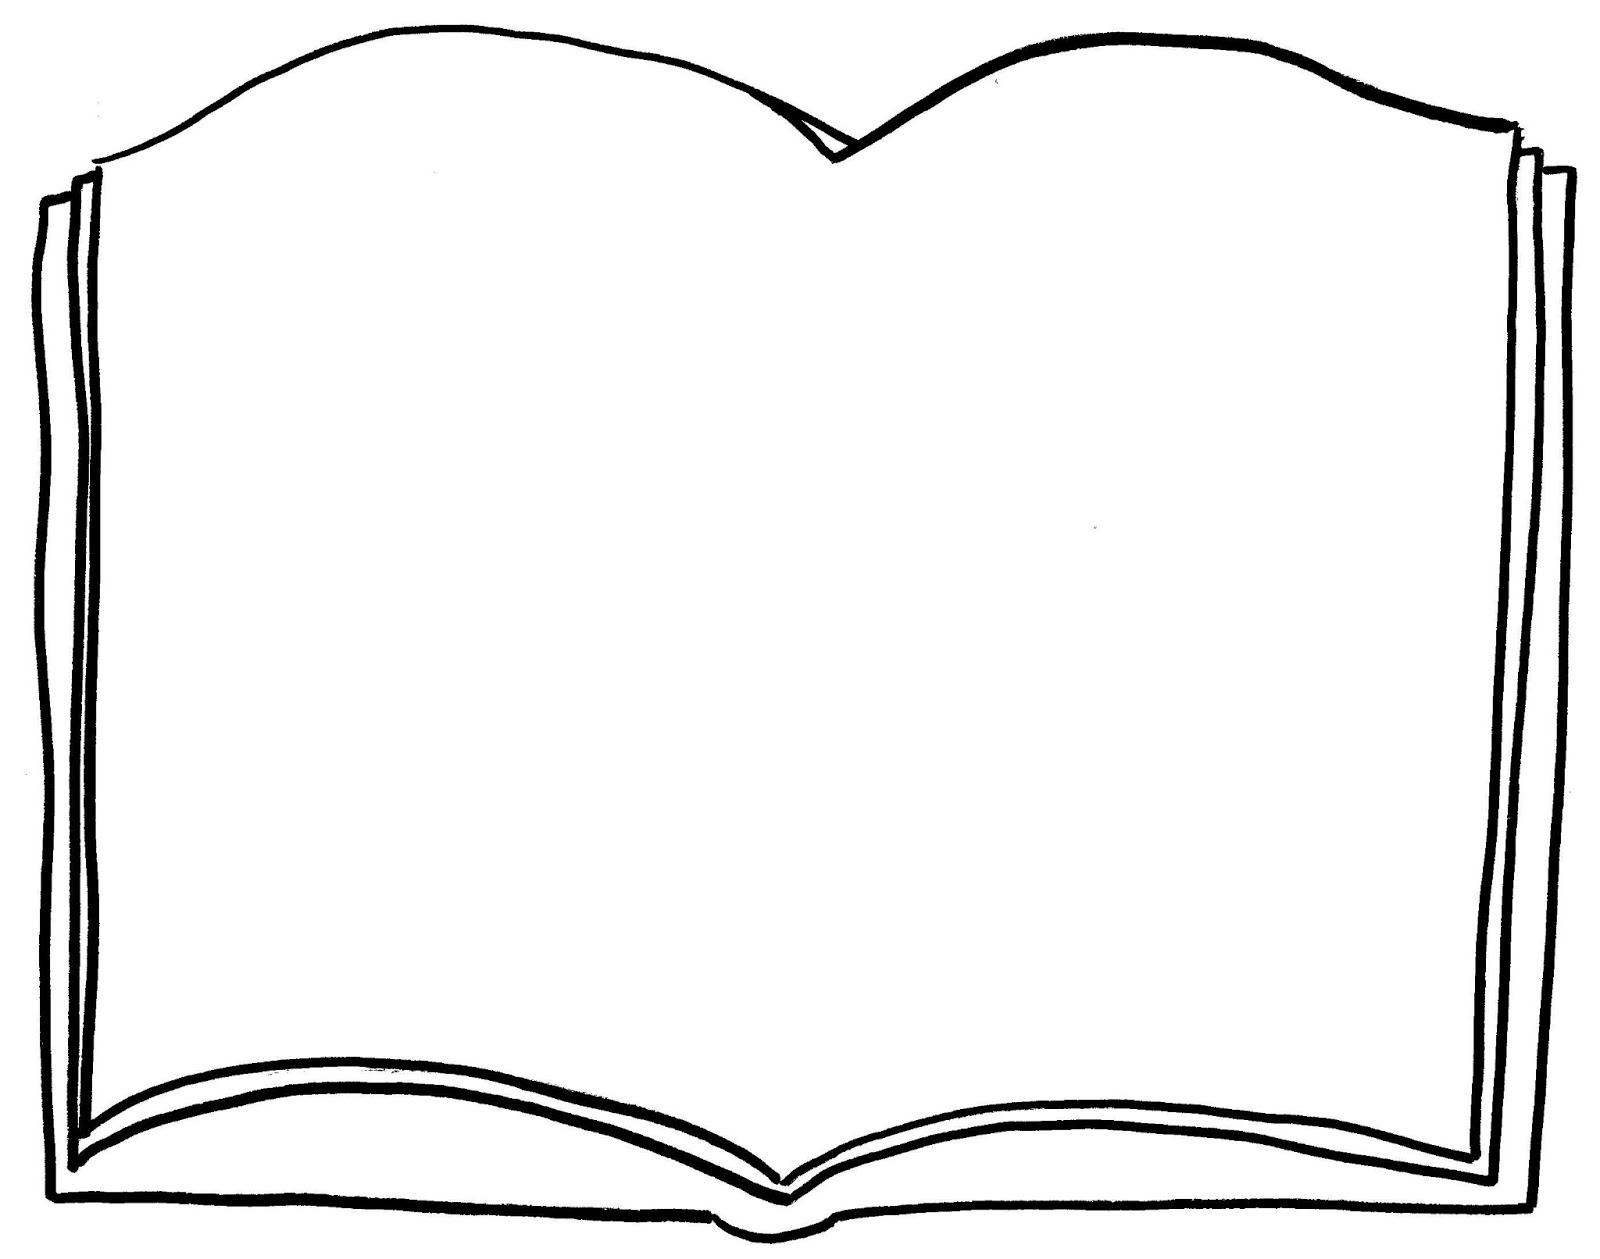 open book clipart black and white - photo #27